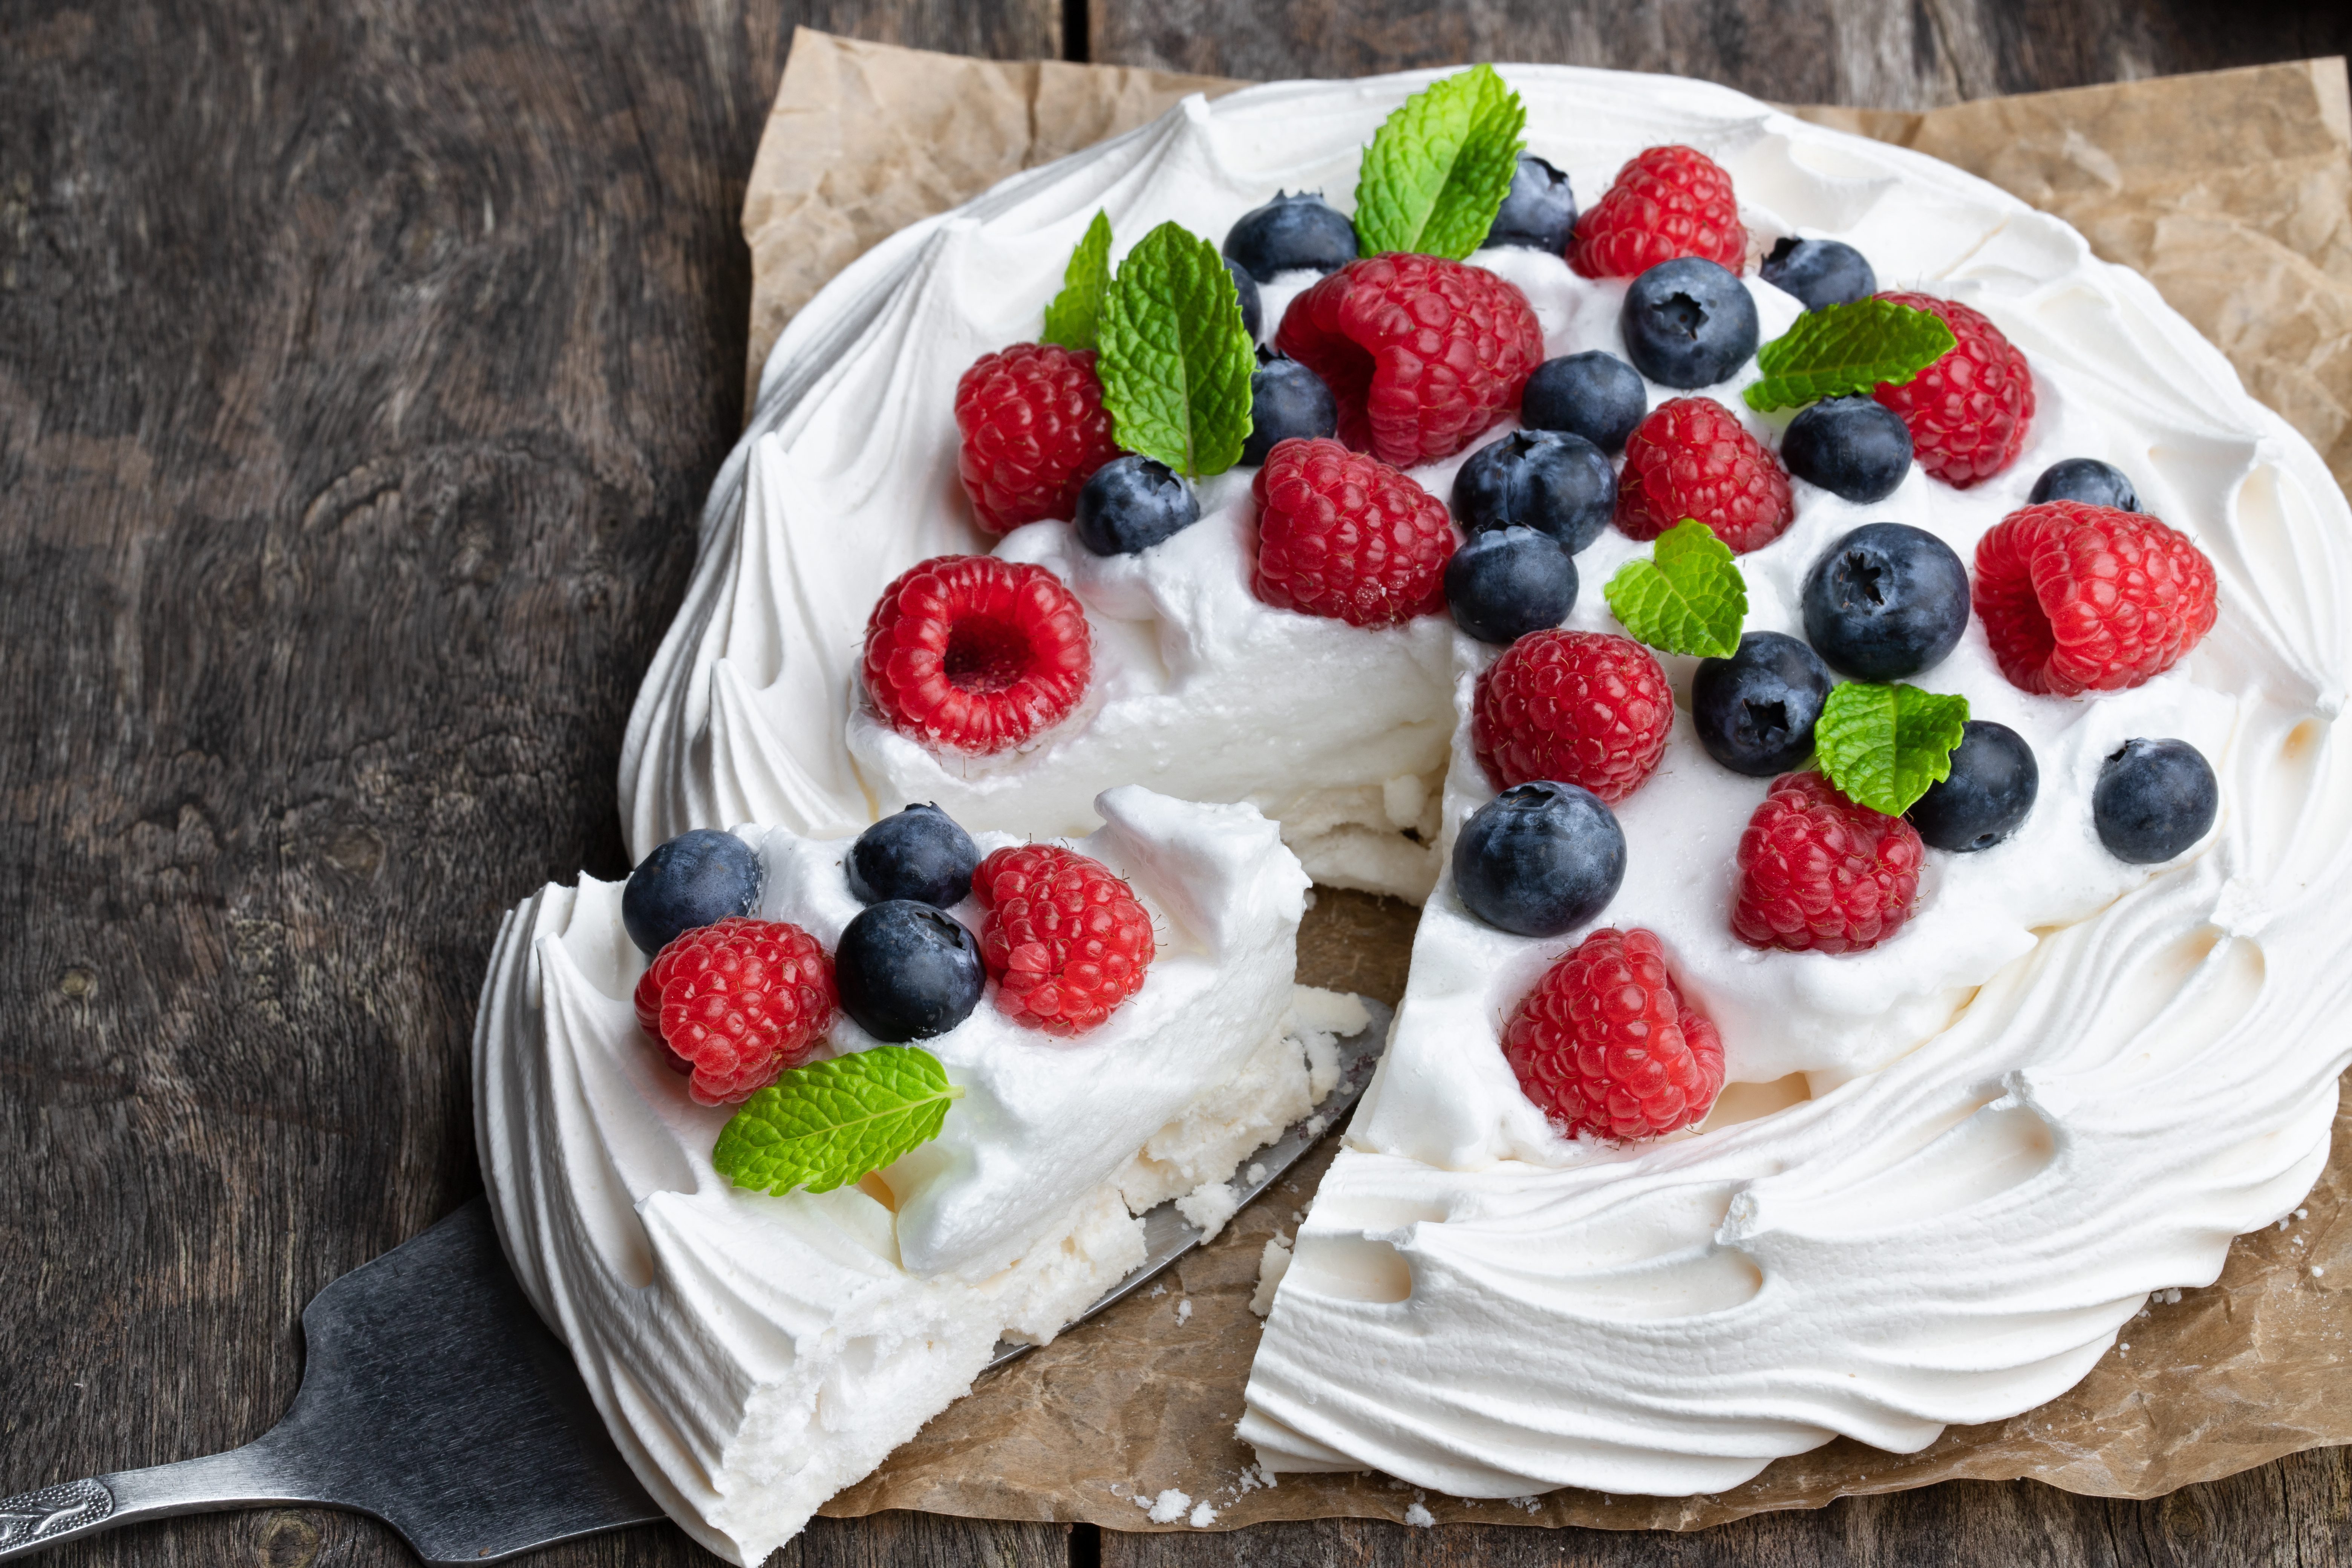 Pavlova meringue nest with berries and mint leaves on wooden table 